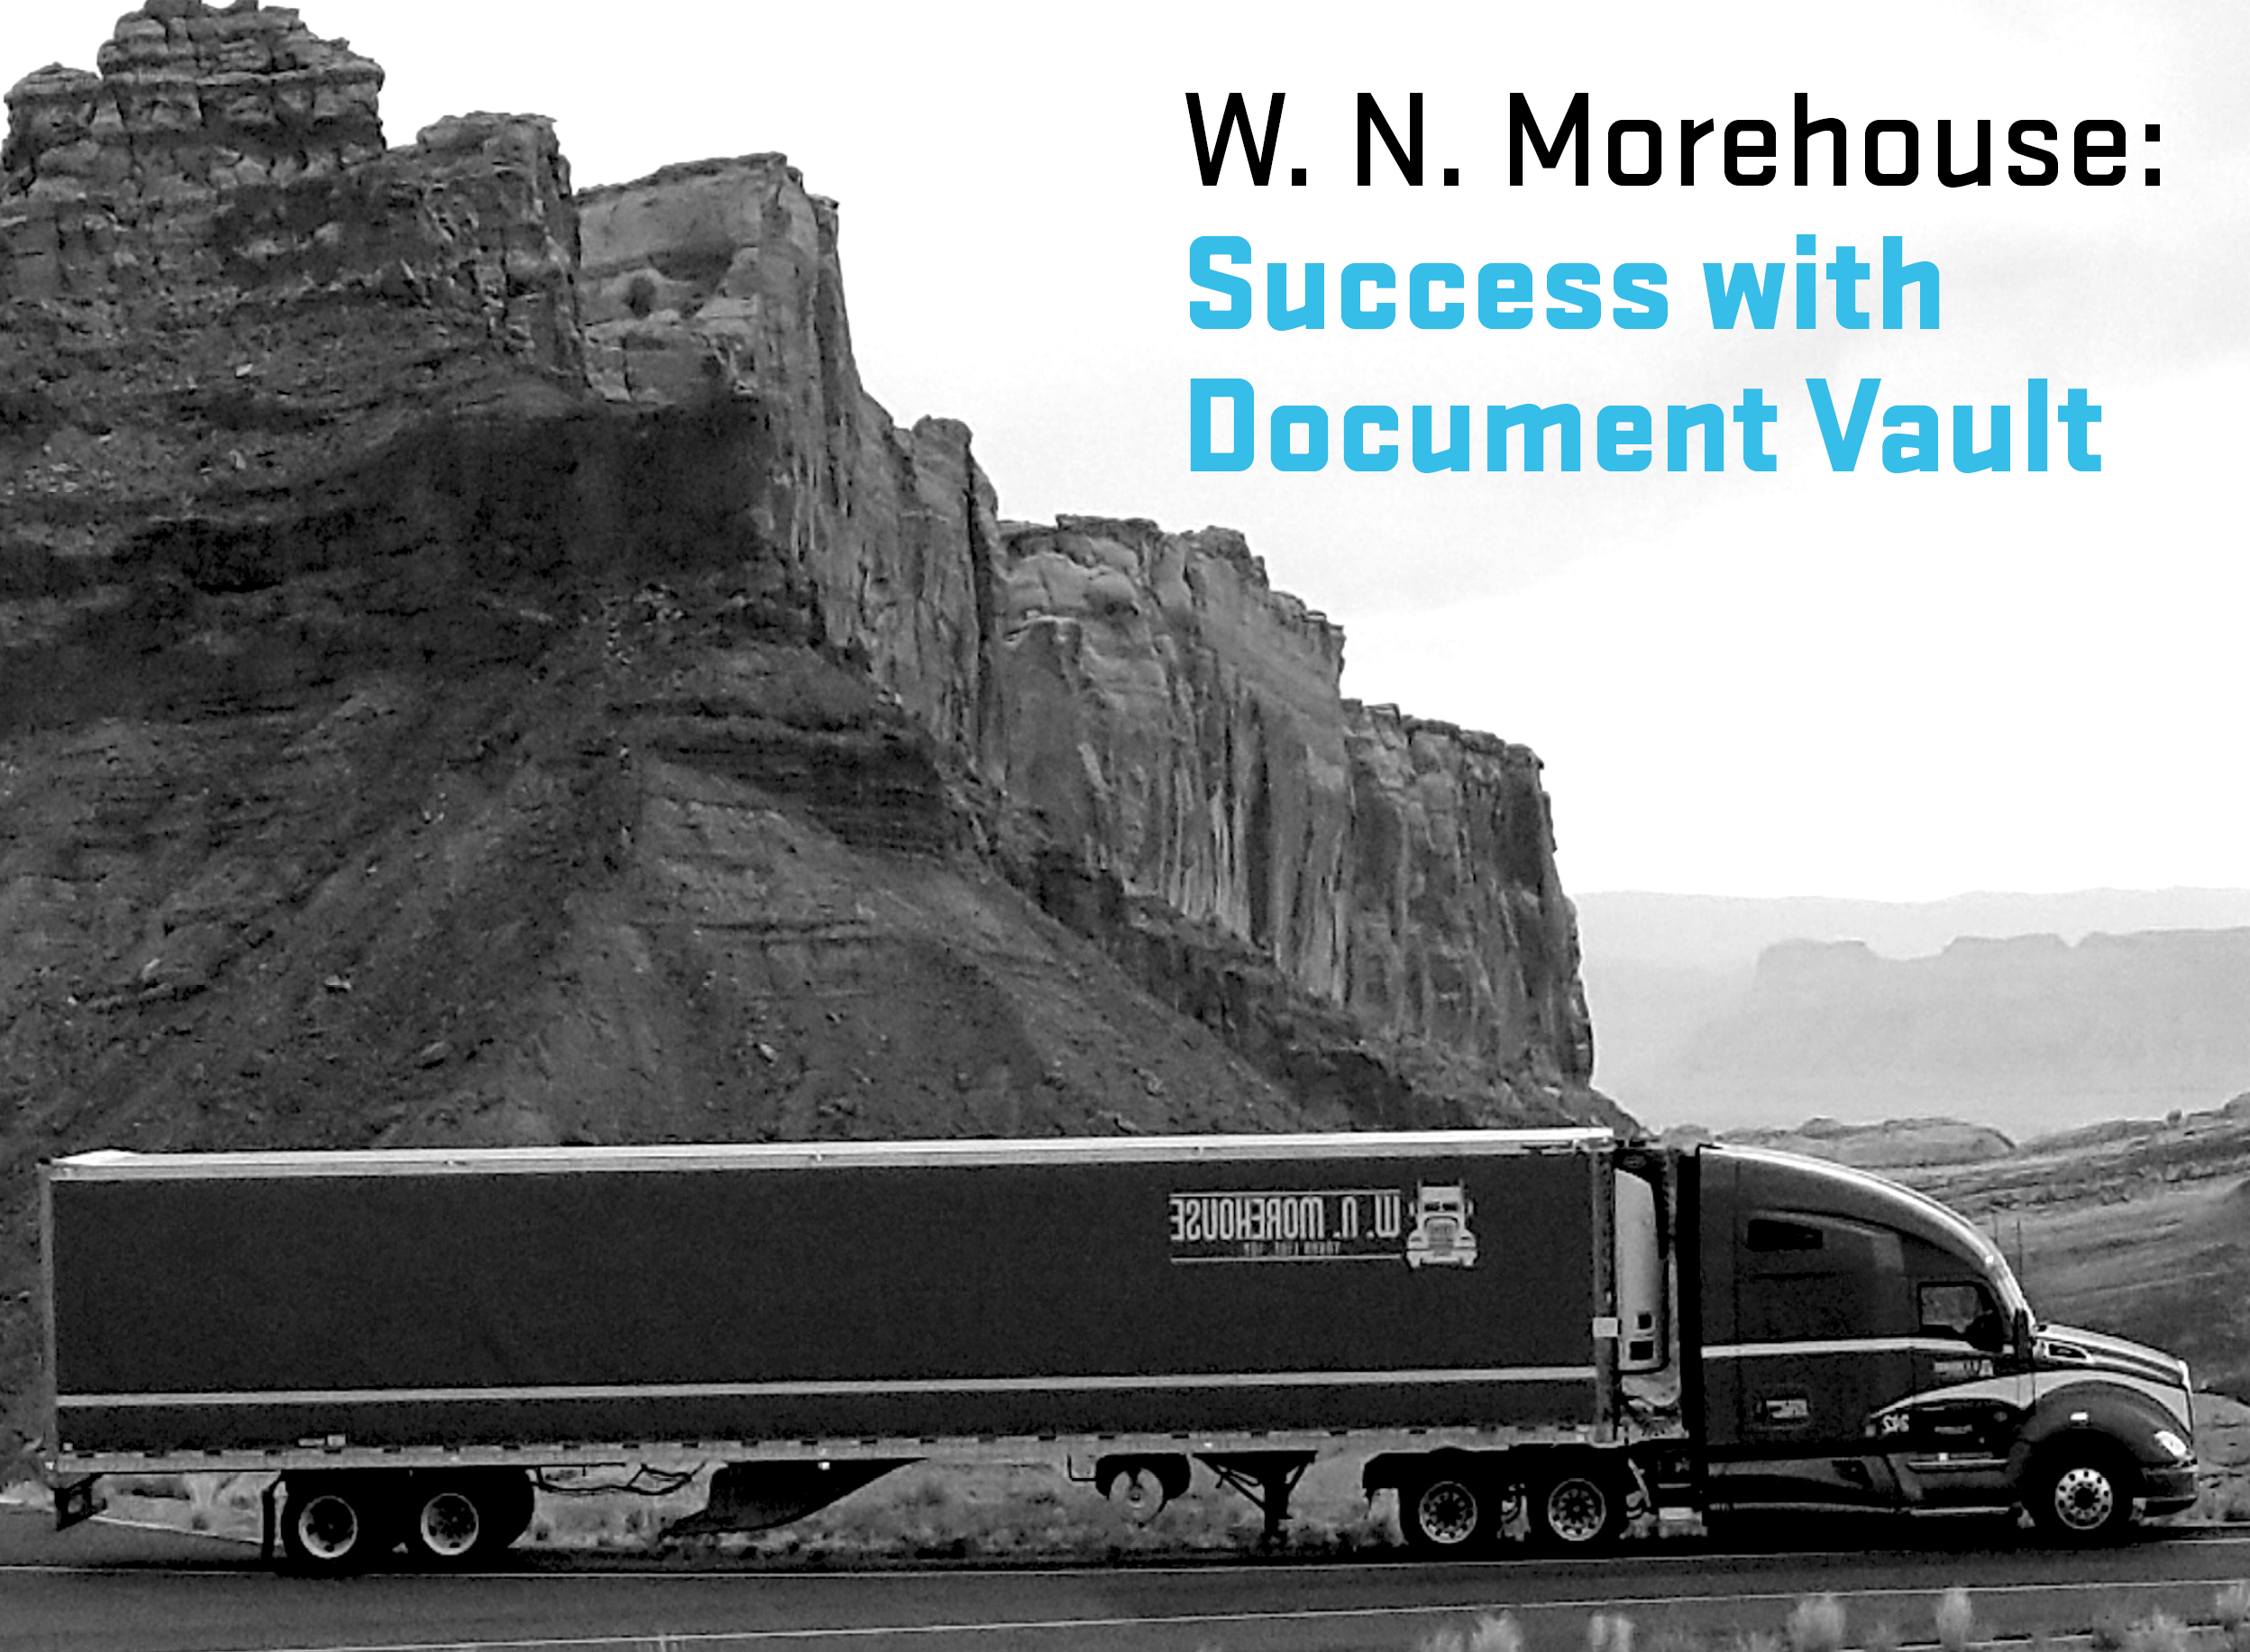 Digital Document Storage Success with W. N. Morehouse and Document Vault